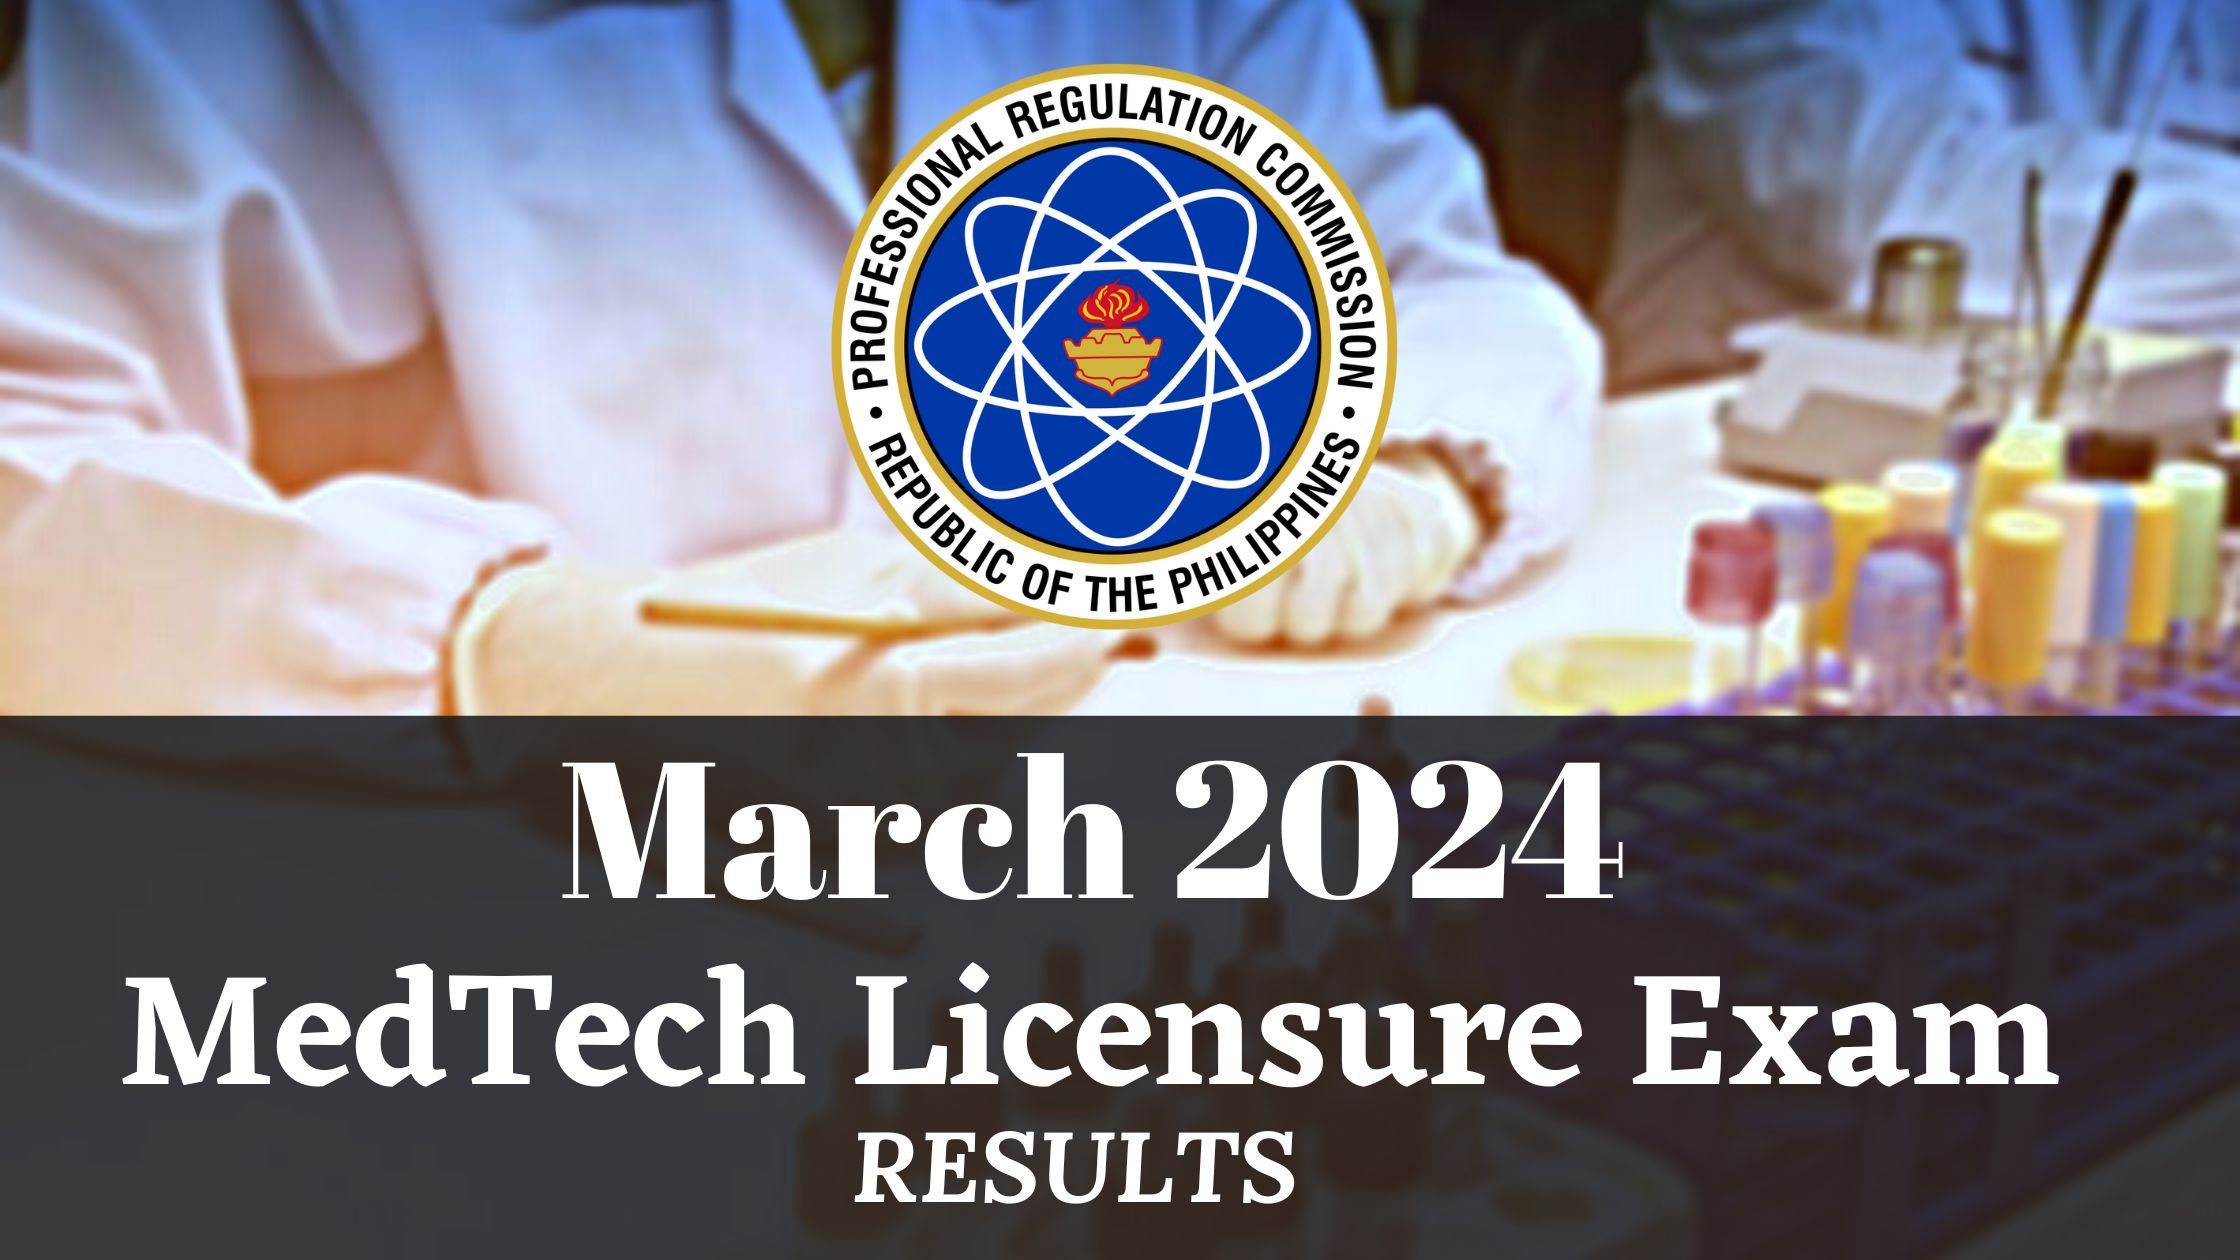 MARCH 2024 MedTech Licensure Exam Results